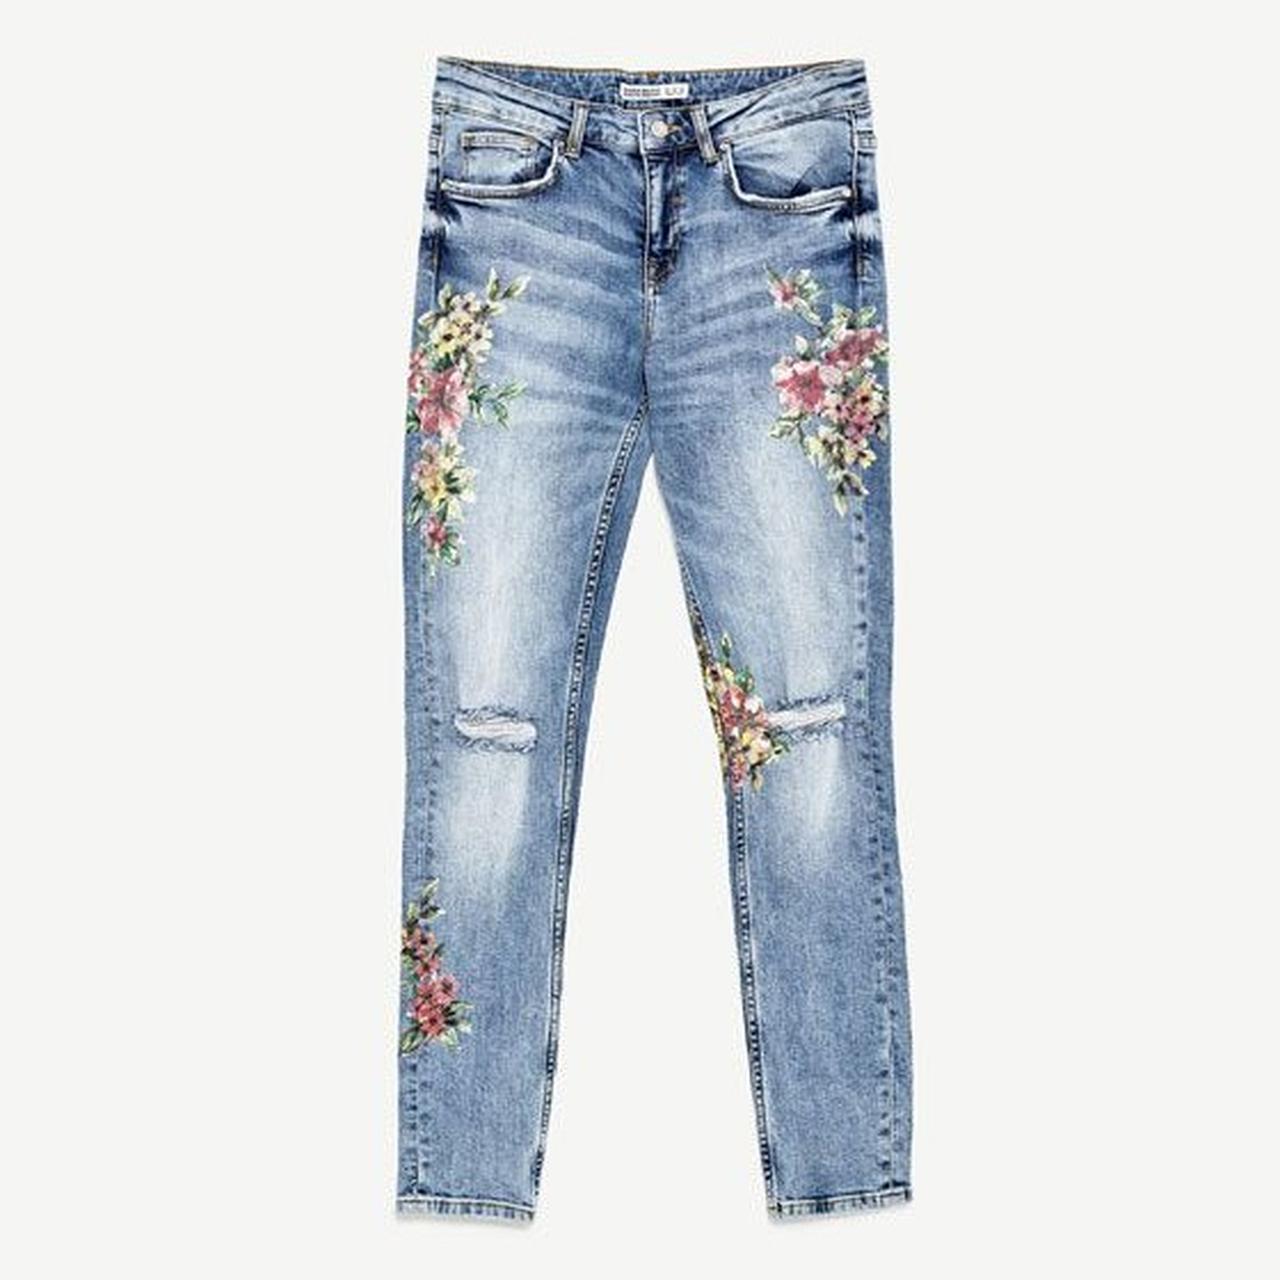 Zara Girls Flower And Bug Embroidered Jeans Size 9/10